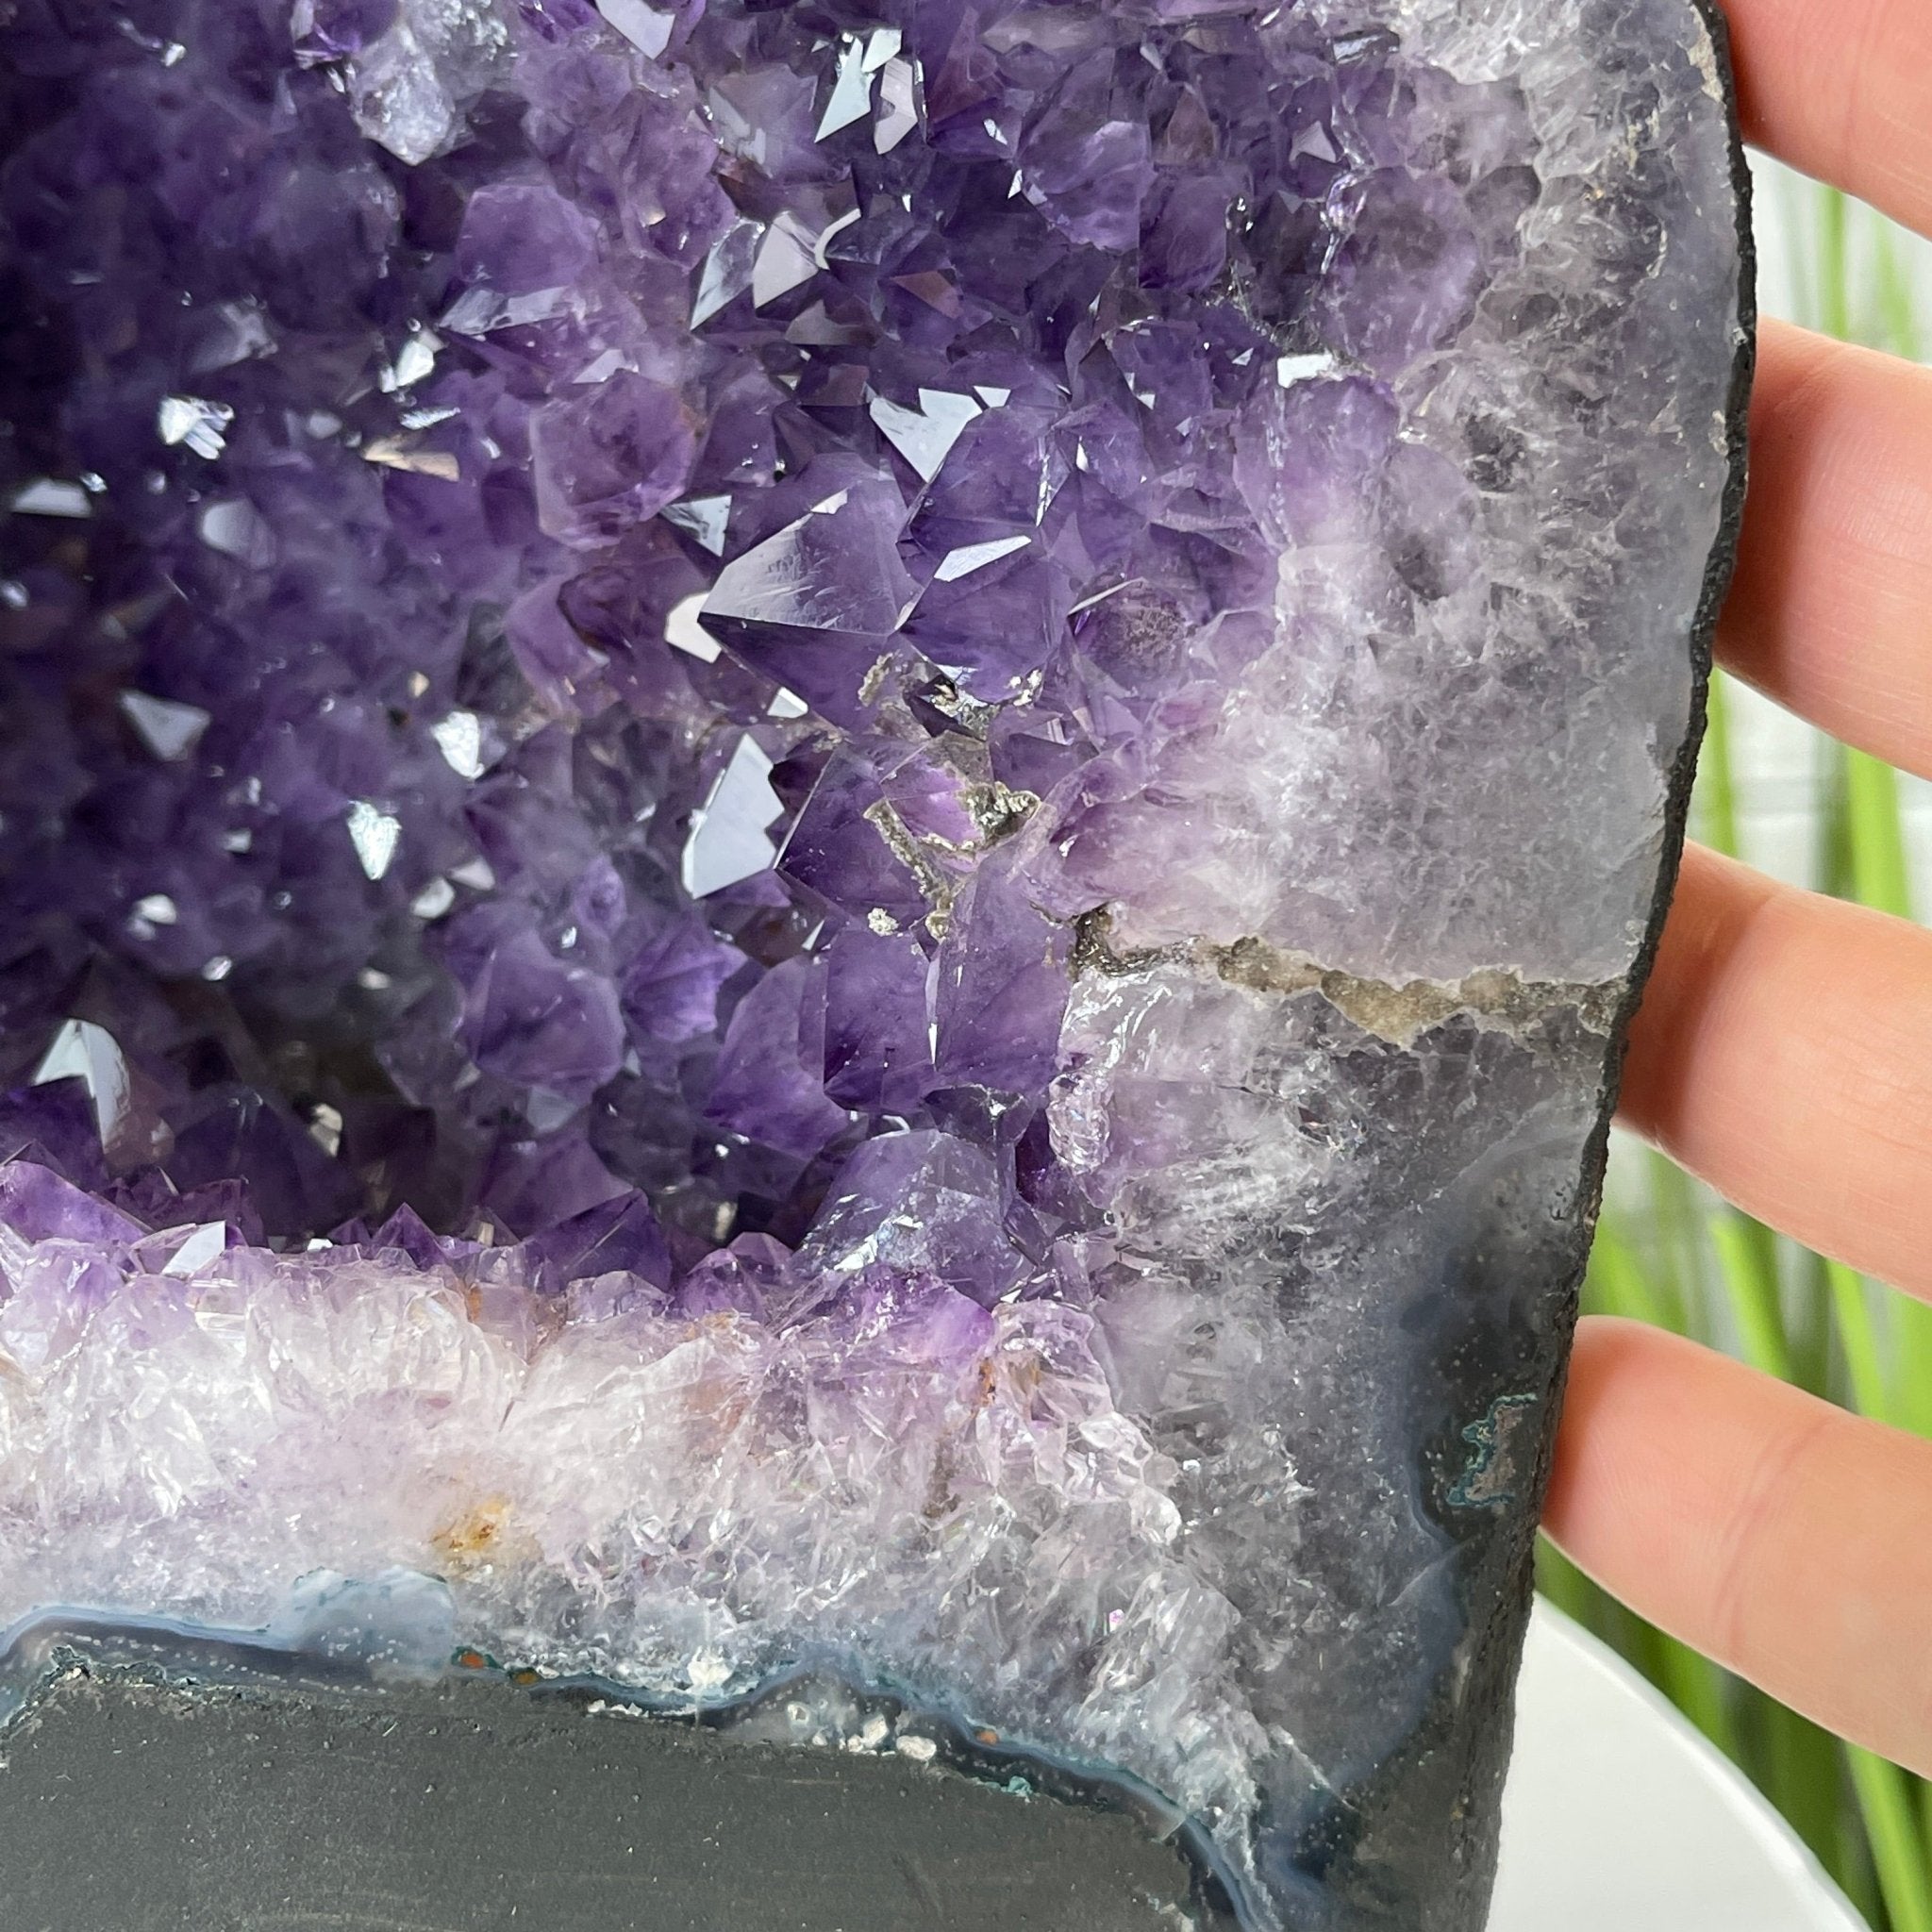 Extra Quality Brazilian Amethyst Cathedral, 10.2” tall & 30.5 lbs #5601-0631 by Brazil Gems - Brazil GemsBrazil GemsExtra Quality Brazilian Amethyst Cathedral, 10.2” tall & 30.5 lbs #5601-0631 by Brazil GemsCathedrals5601-0631